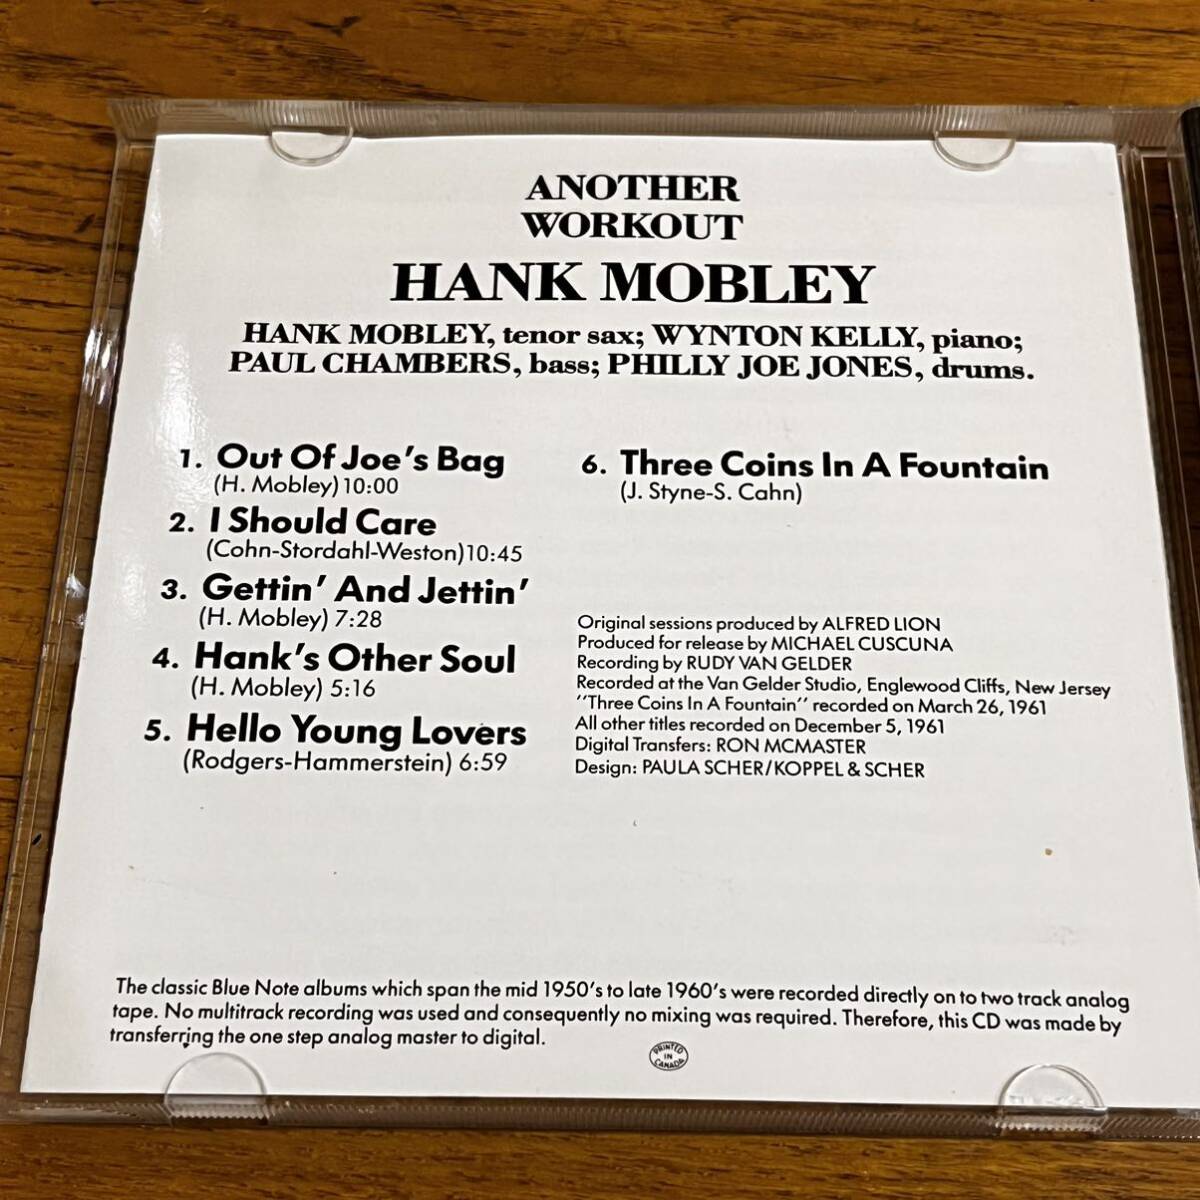 CD ハンク・モブレー HANK MOBLEY ANOTHER WORKOUT ディスク良好_画像2